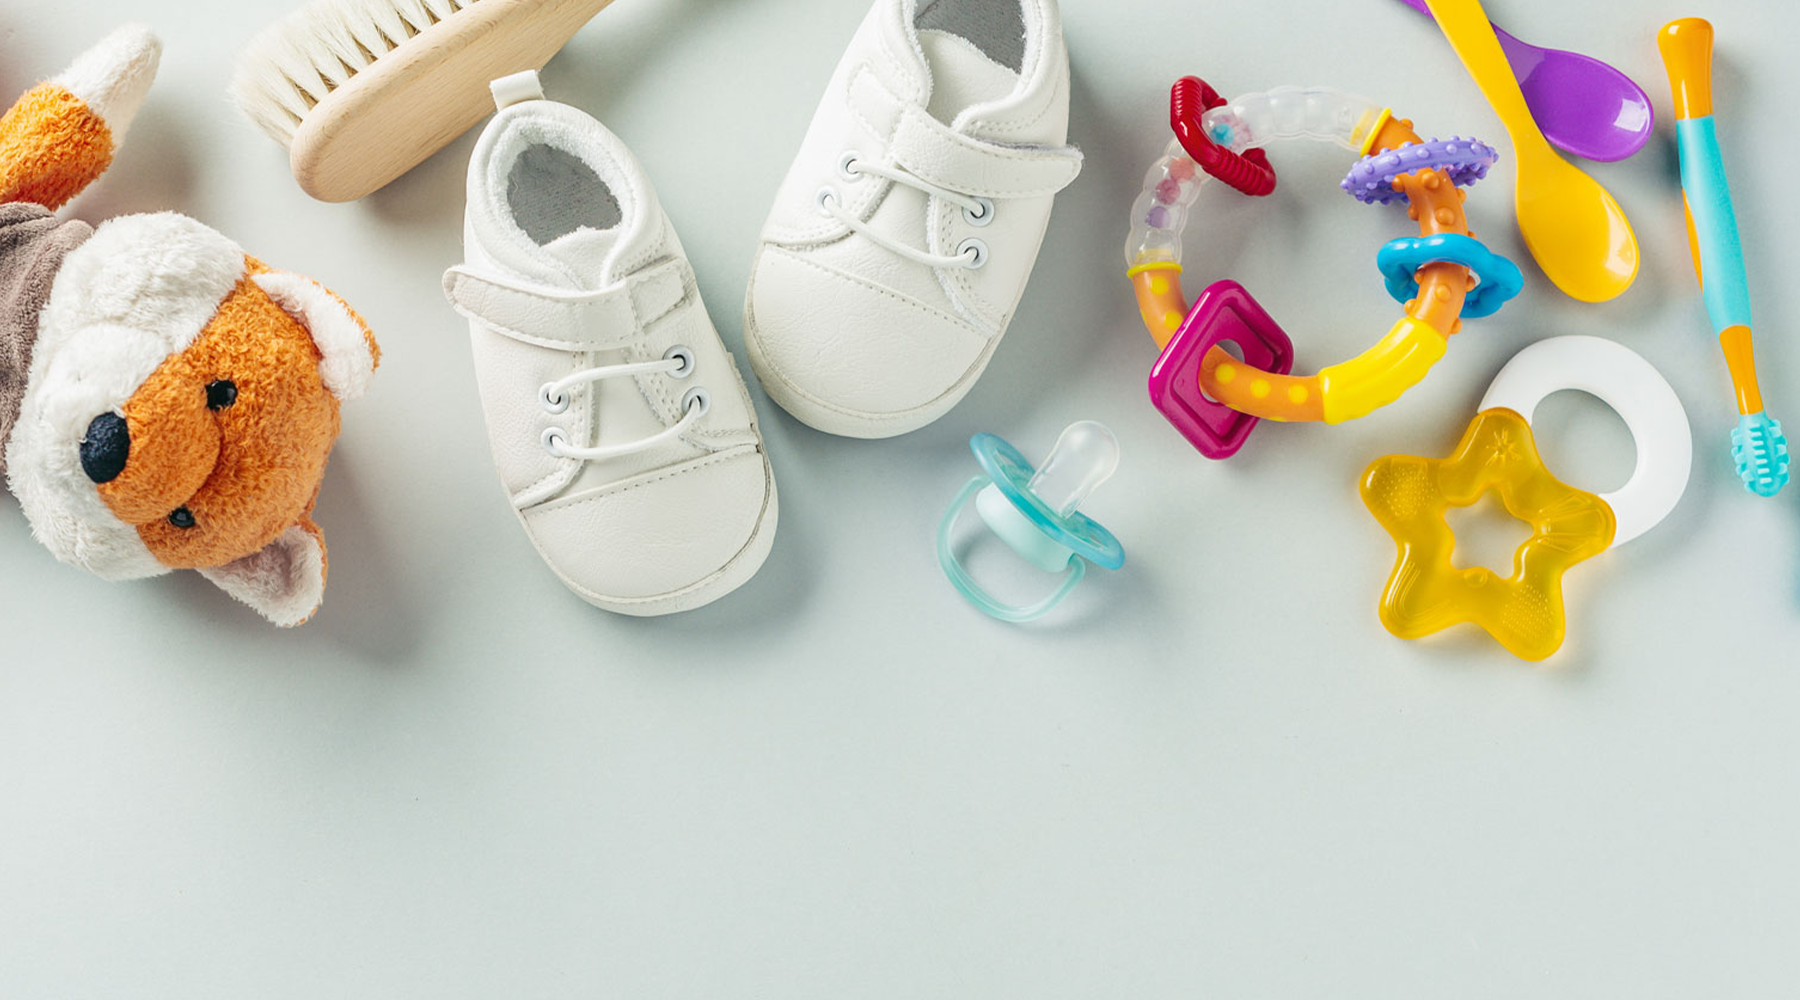 Why featherhead online baby store is best for online baby shopping